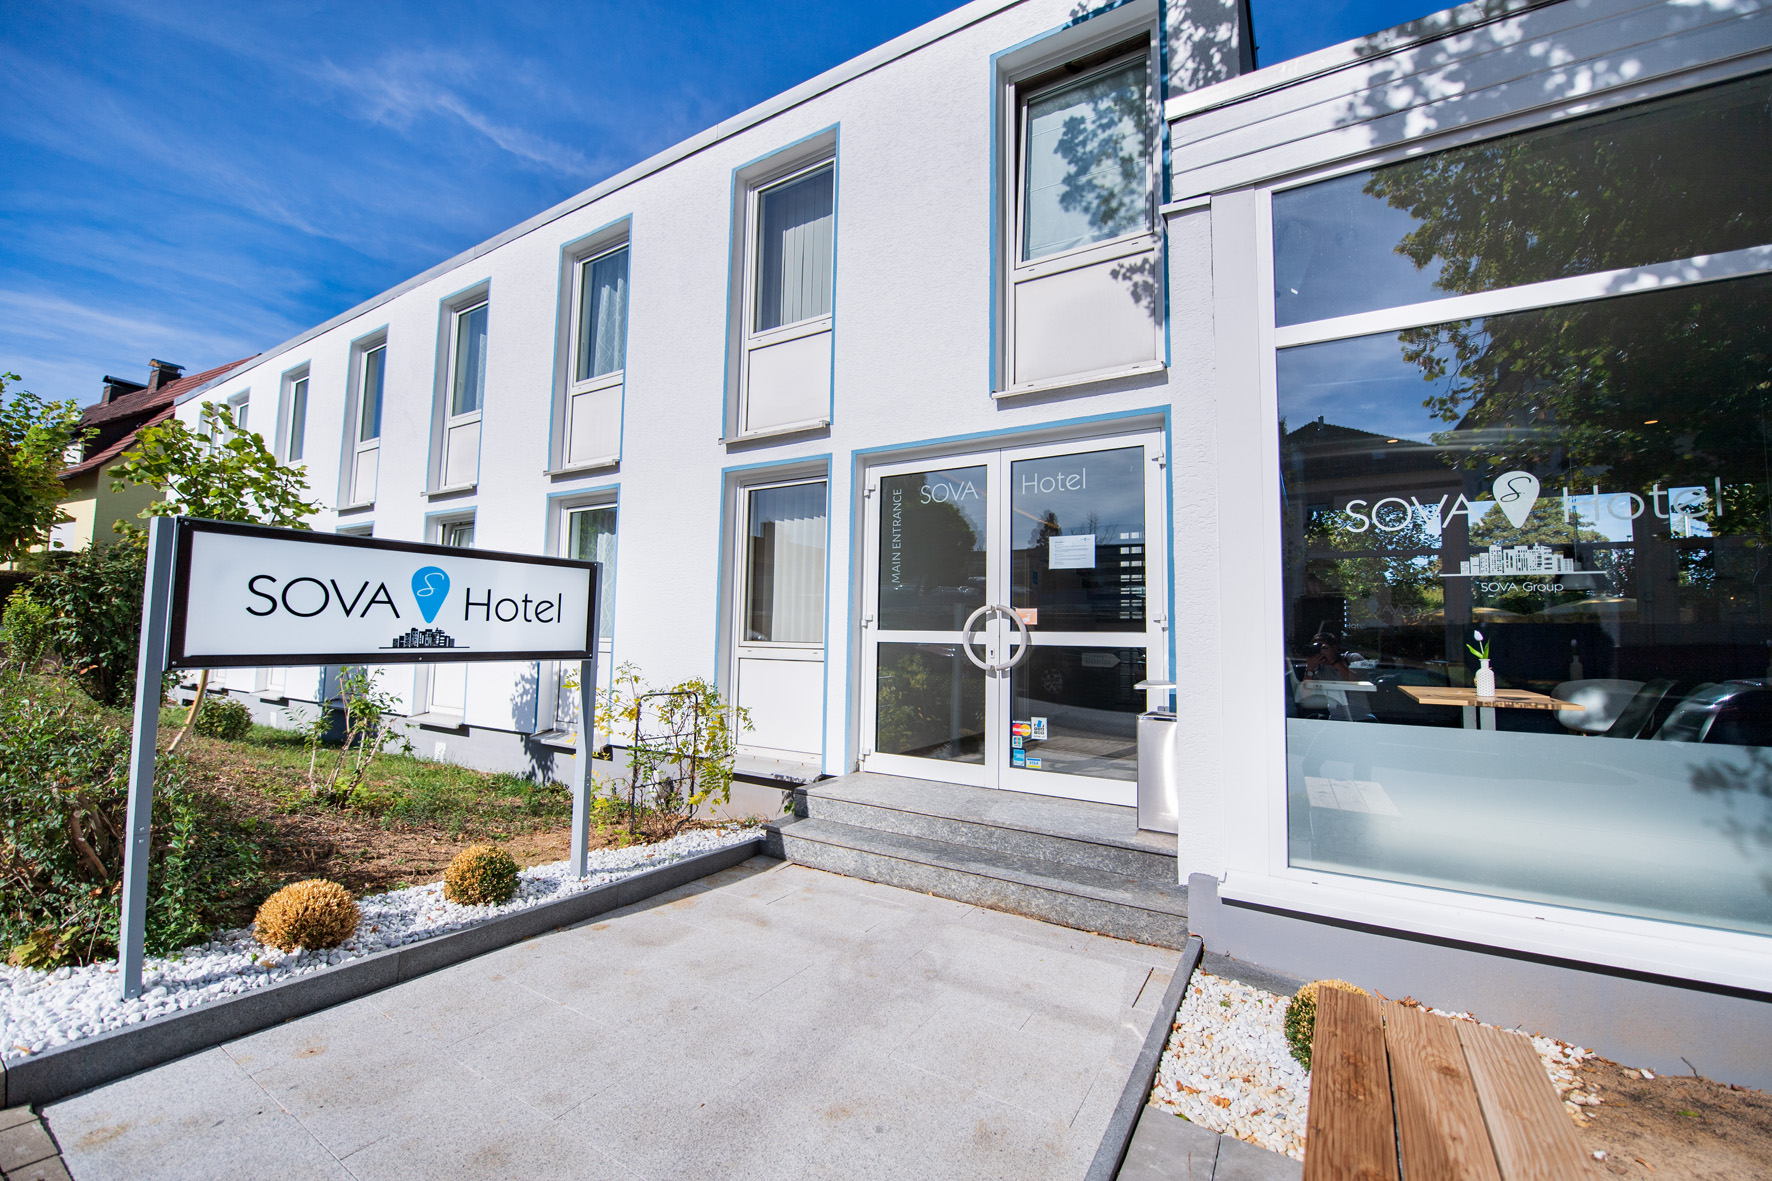 SOVA Hotel <br/>54.50 ew <br/> <a href='http://vakantieoplossing.nl/outpage/?id=419b5a7cc8906a2d3e2f9cddd5438e09' target='_blank'>View Details</a>